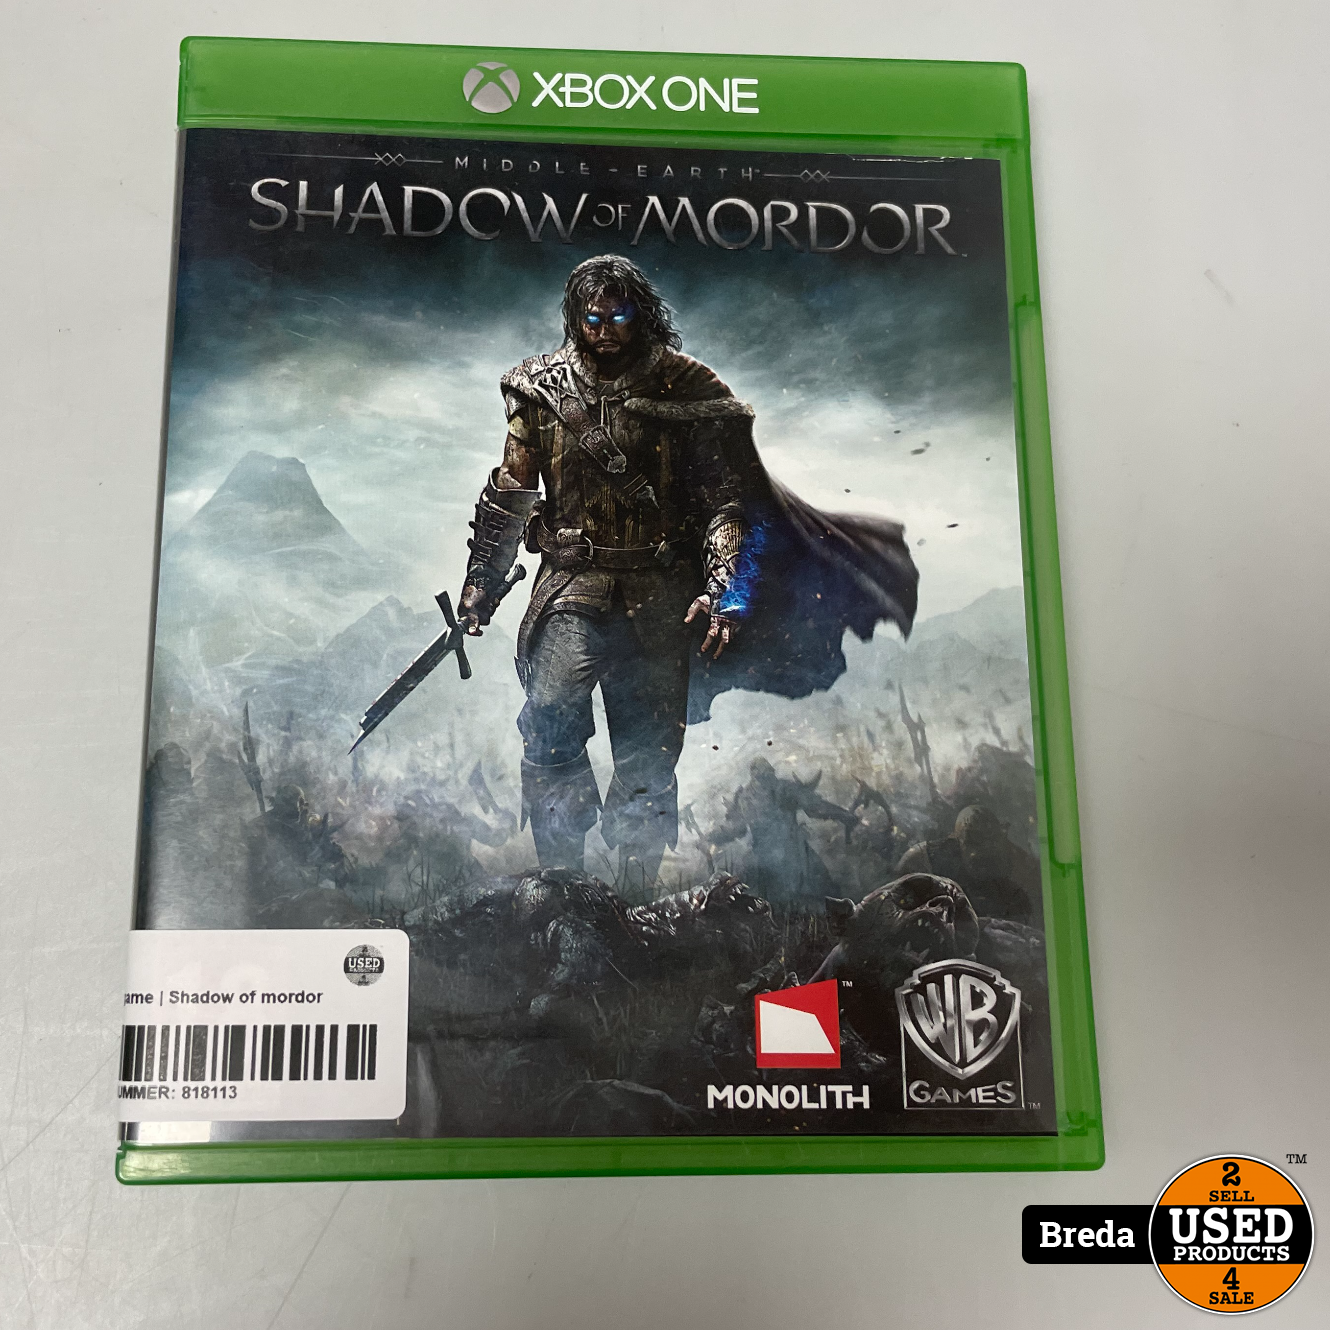 Berg kleding op Landgoed Spin Xbox one game | Shadow of mordor - Used Products Breda